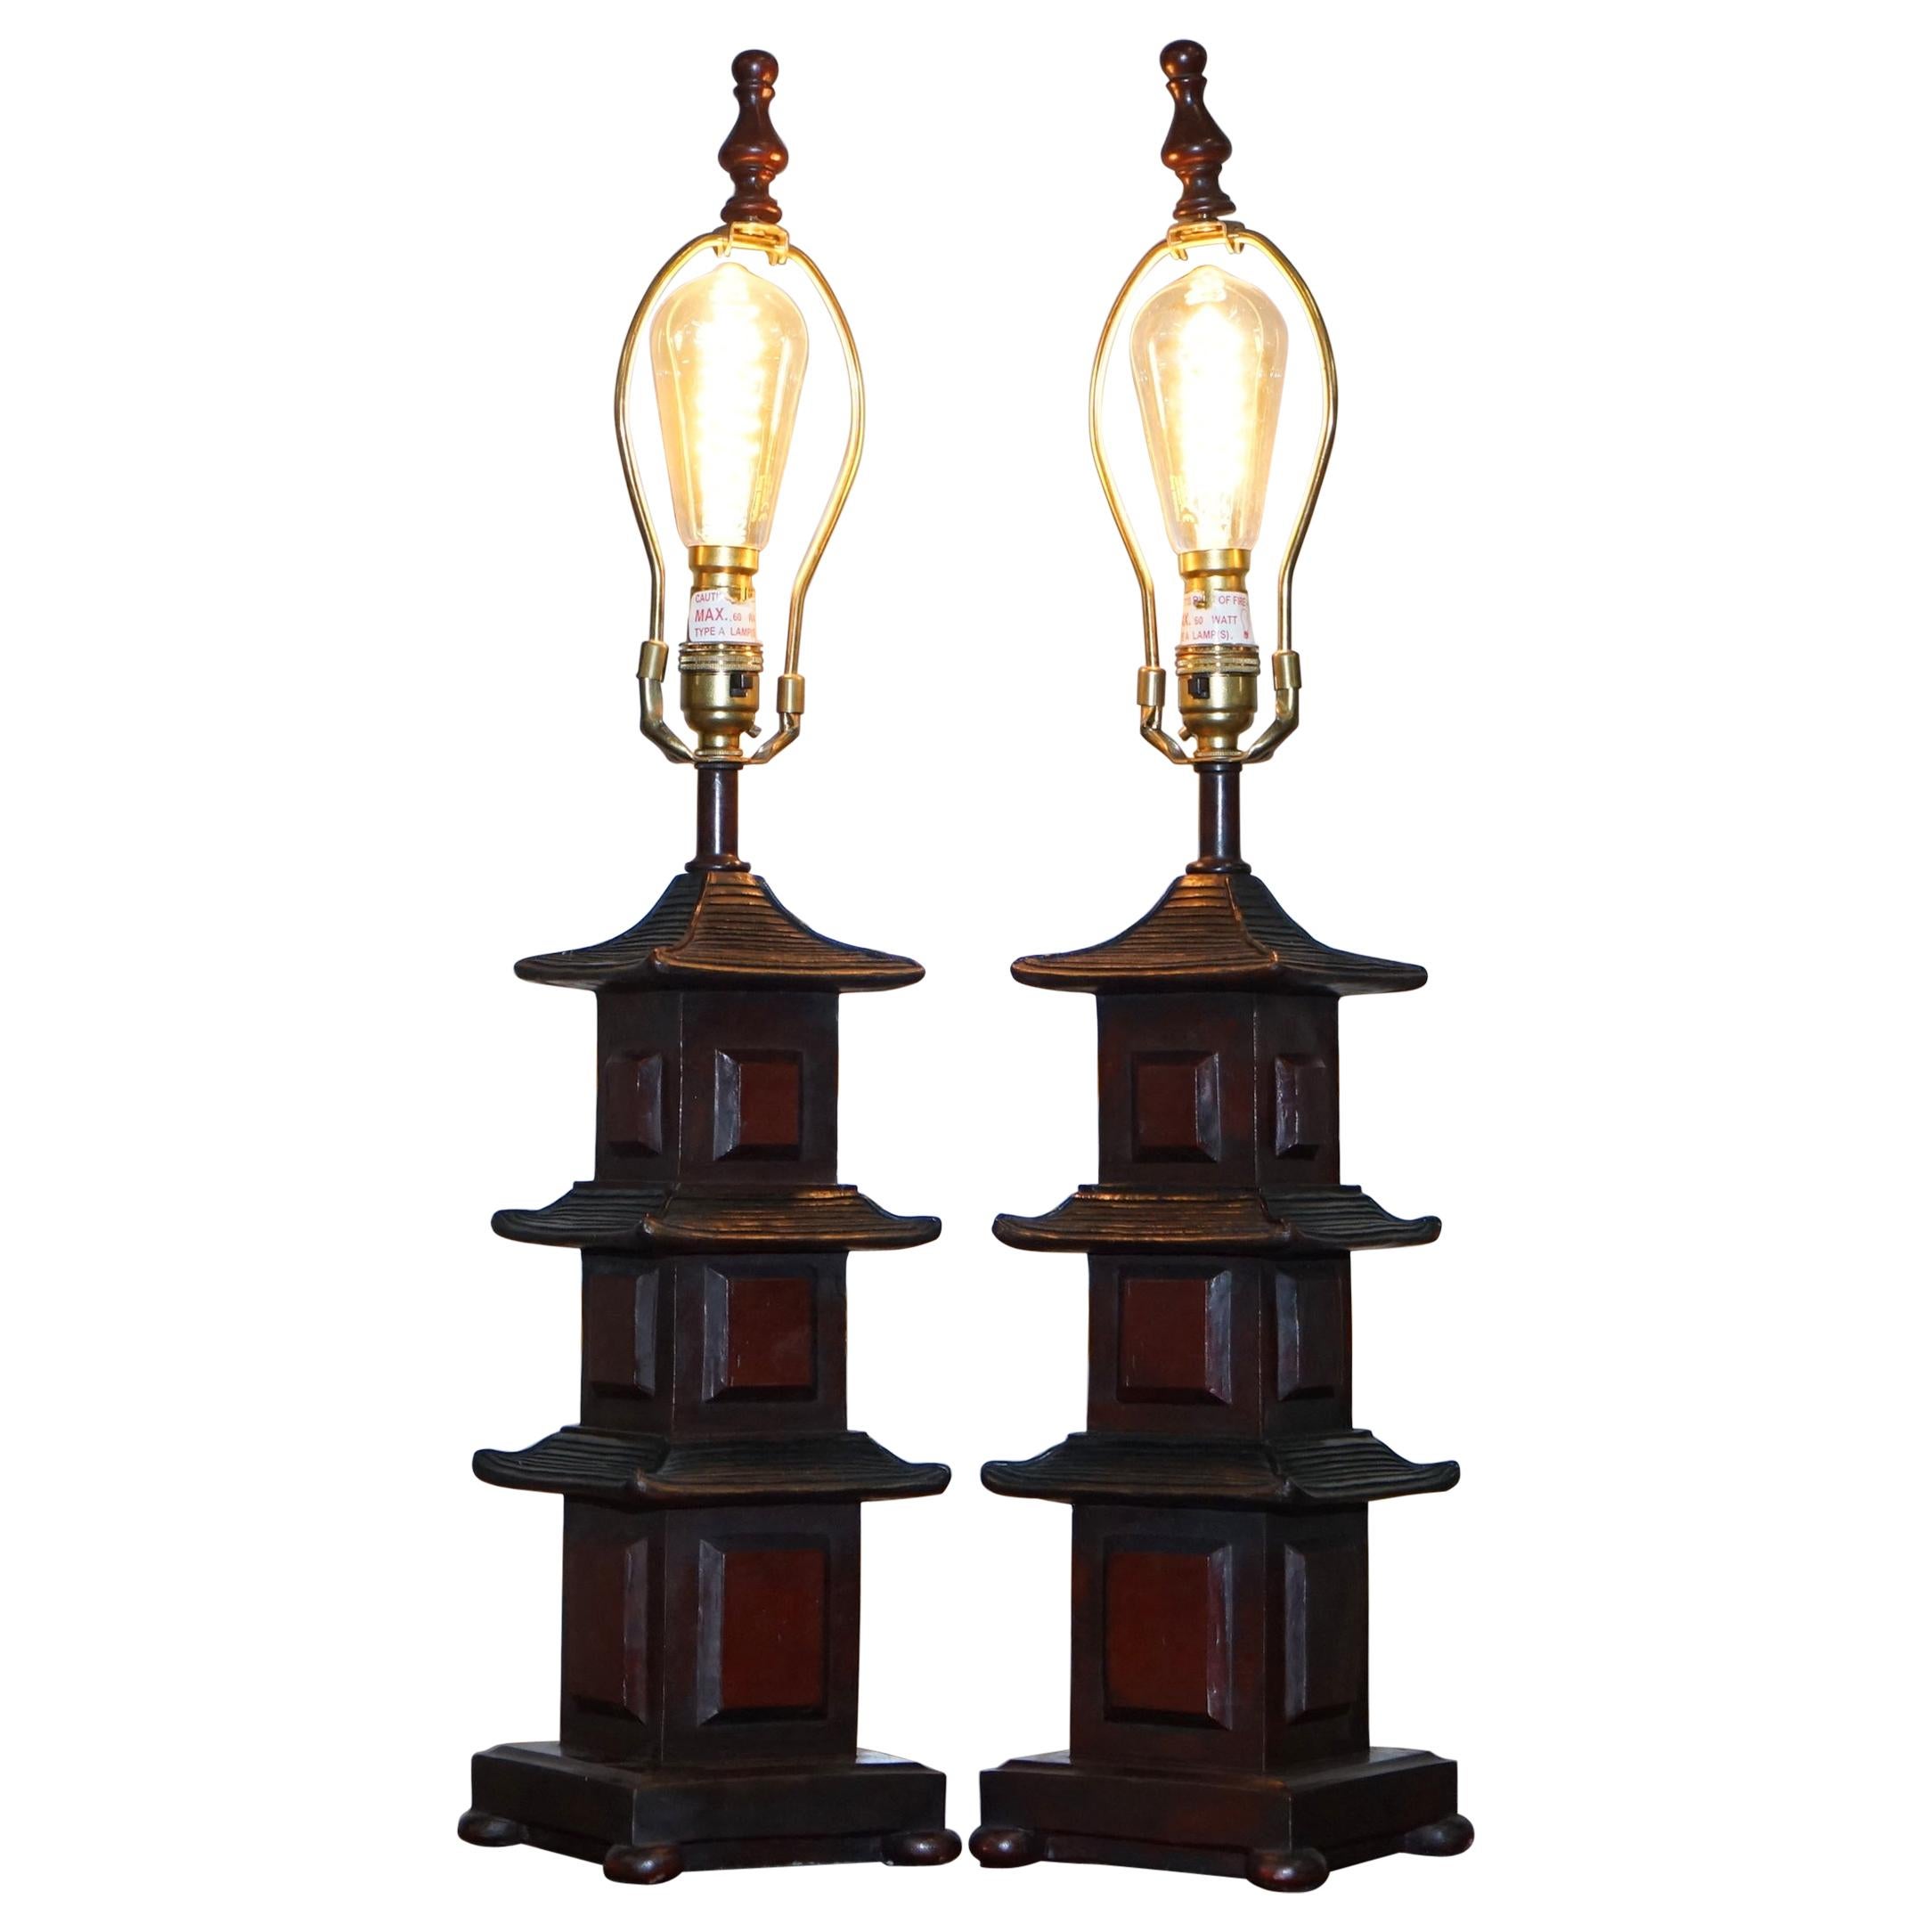 Stunning Pair of Austin the Home Collection Chinese Pagoda Temple Table Lamps